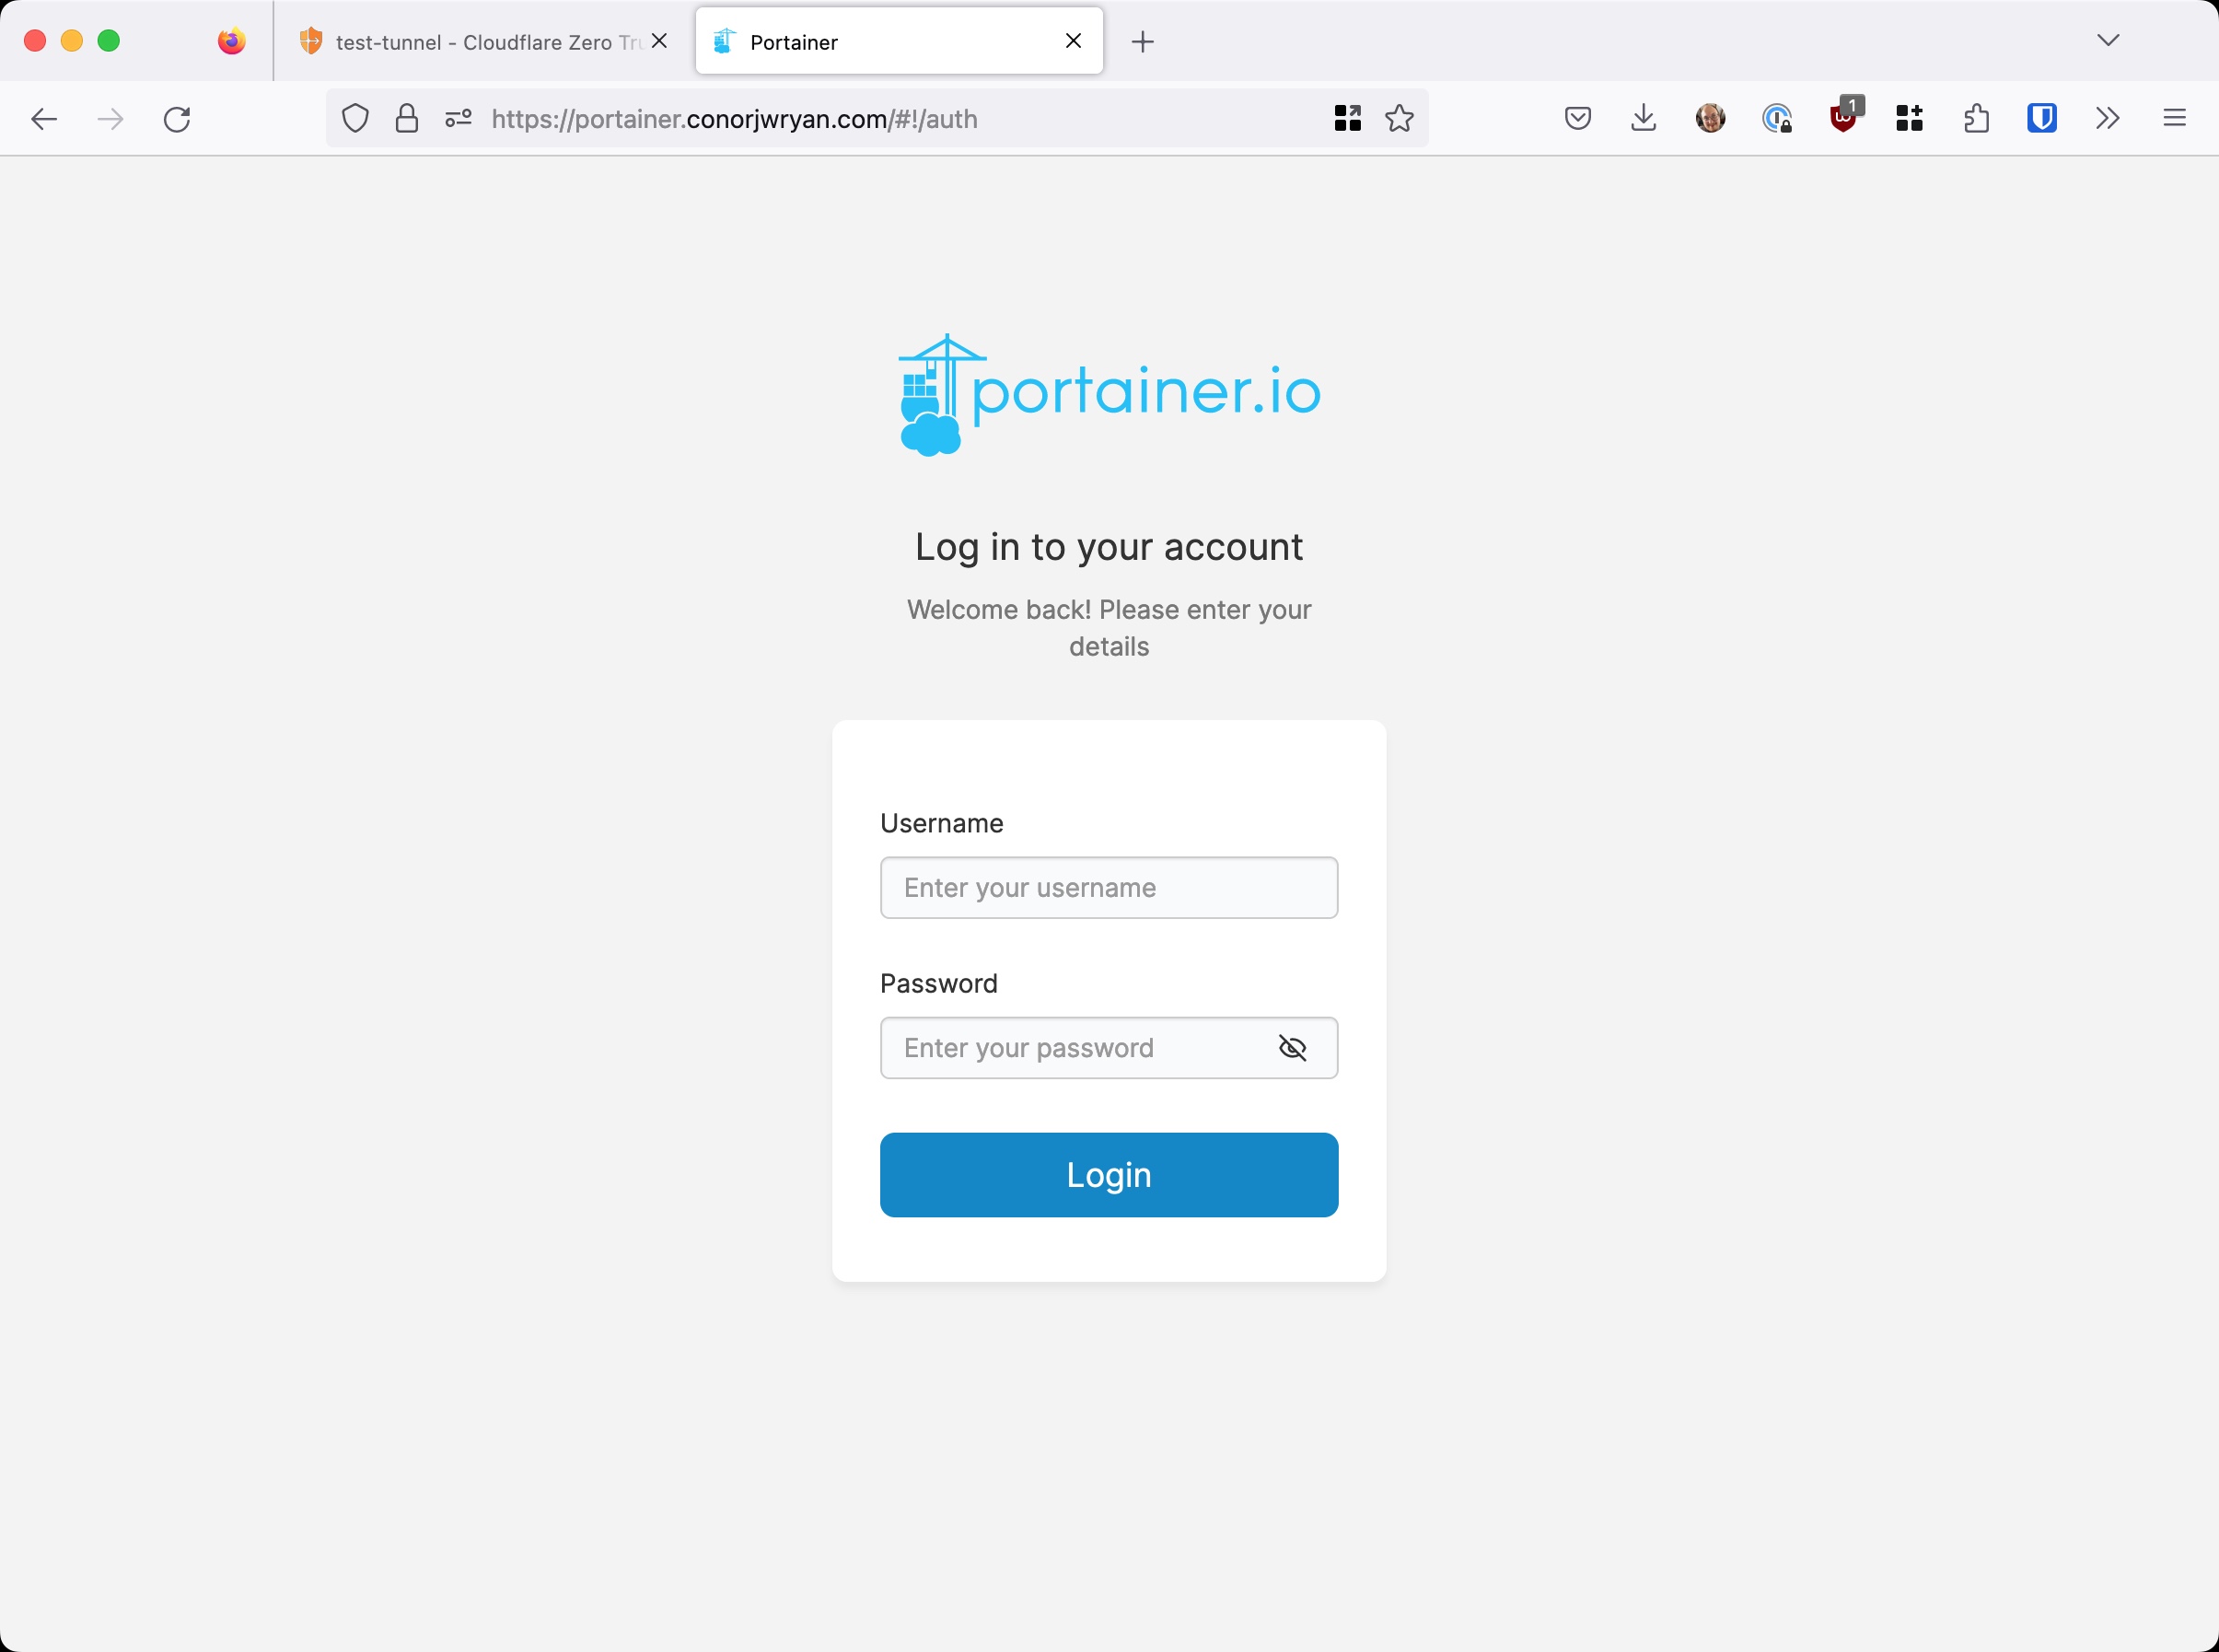 A screenshot showing the refreshed portainer page now does not show error 502